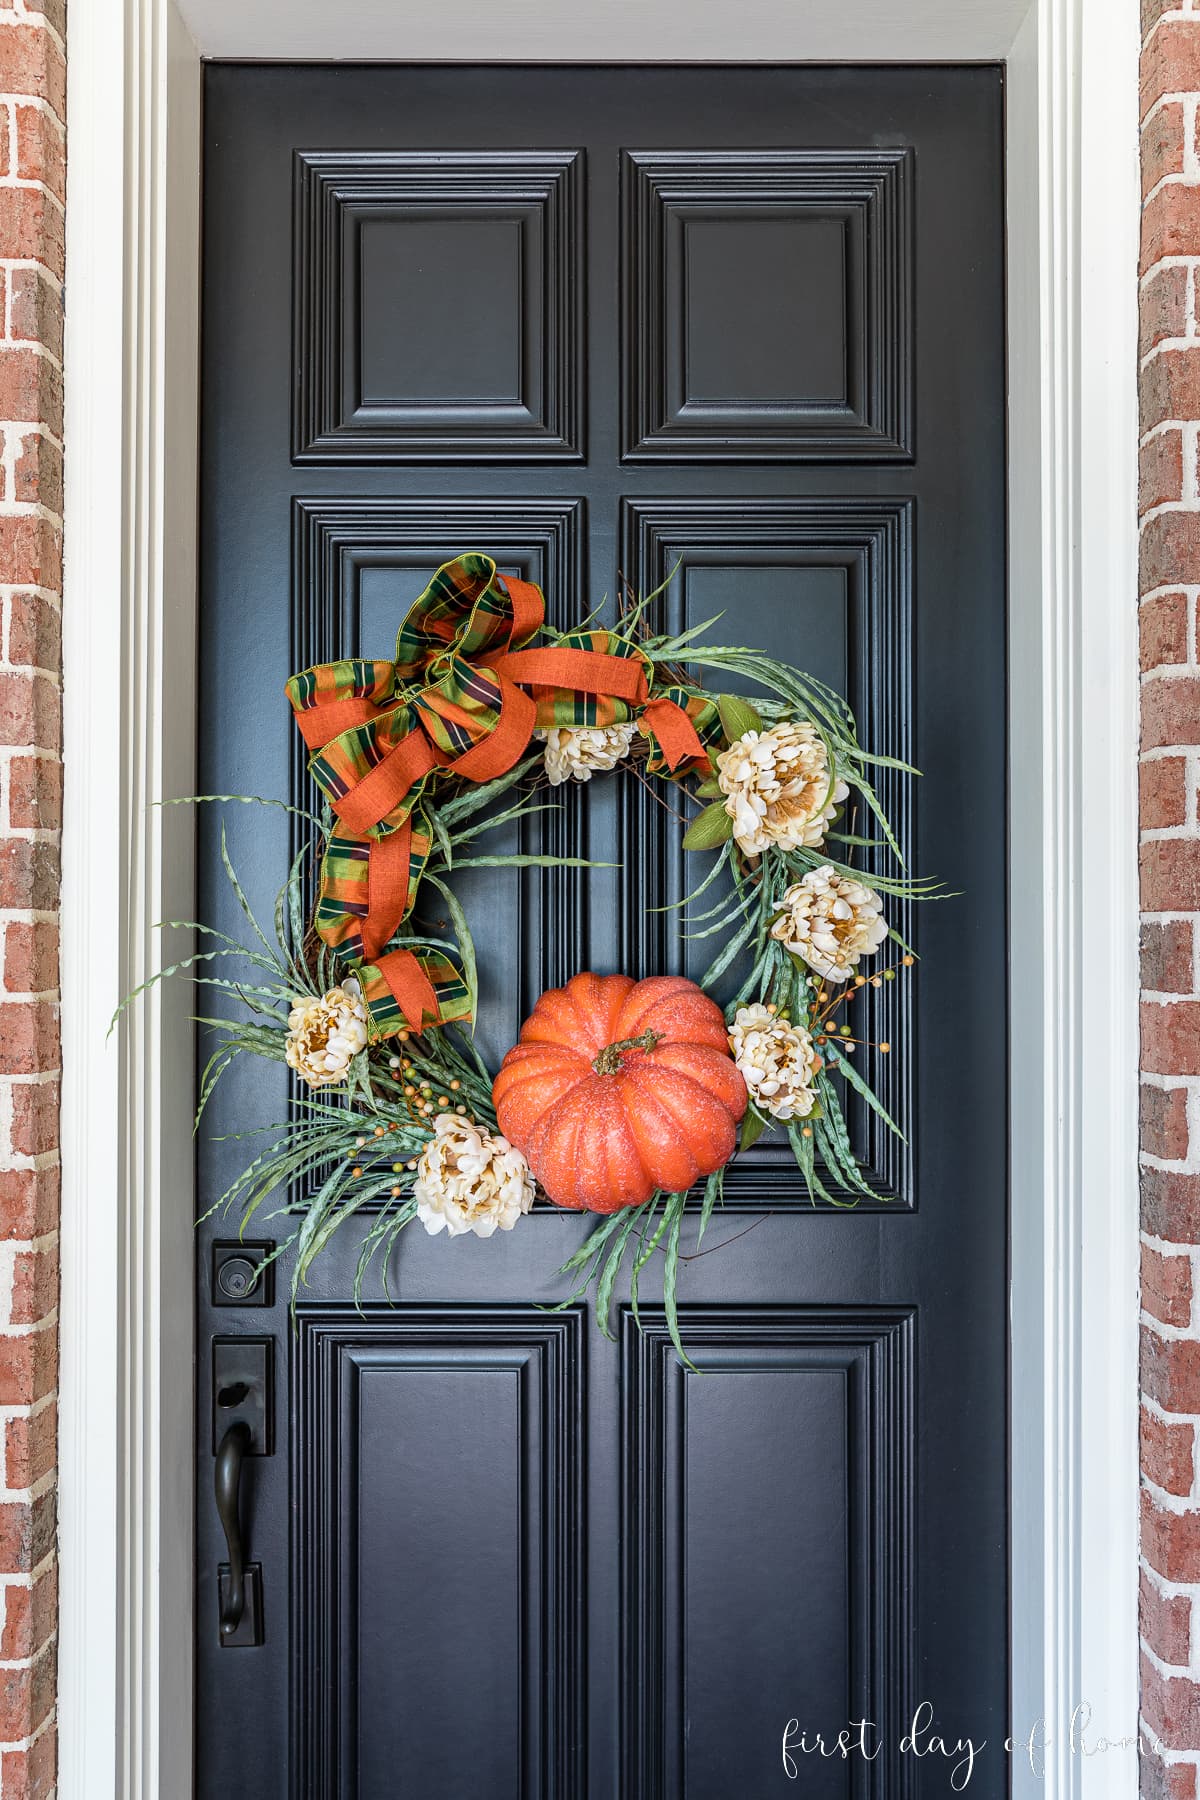 Closeup view of DIY fall grapevine wreath on front door